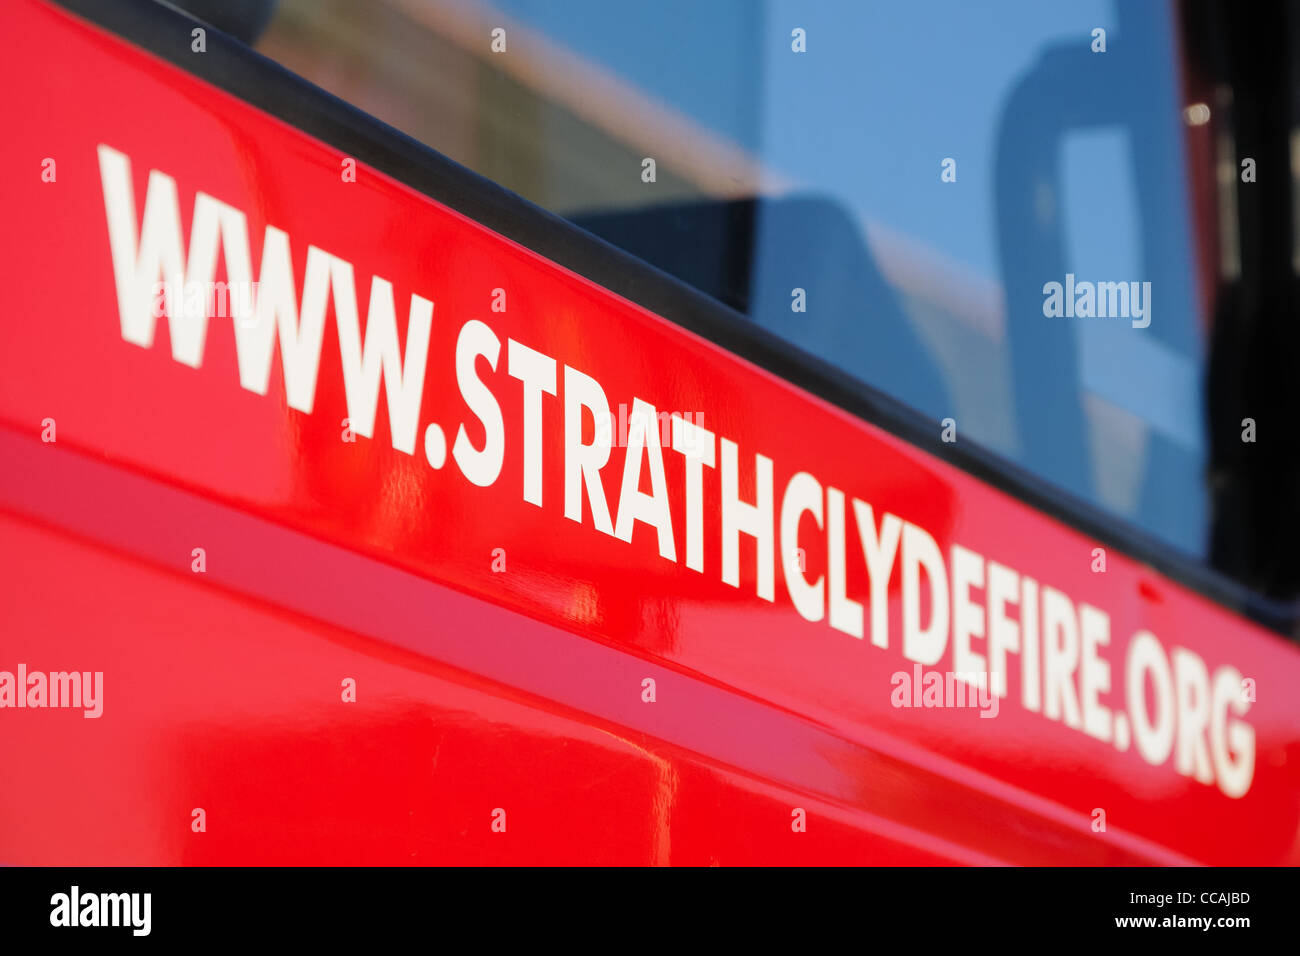 Strathclyde fire and rescue fire appliance with Internet address. Stock Photo